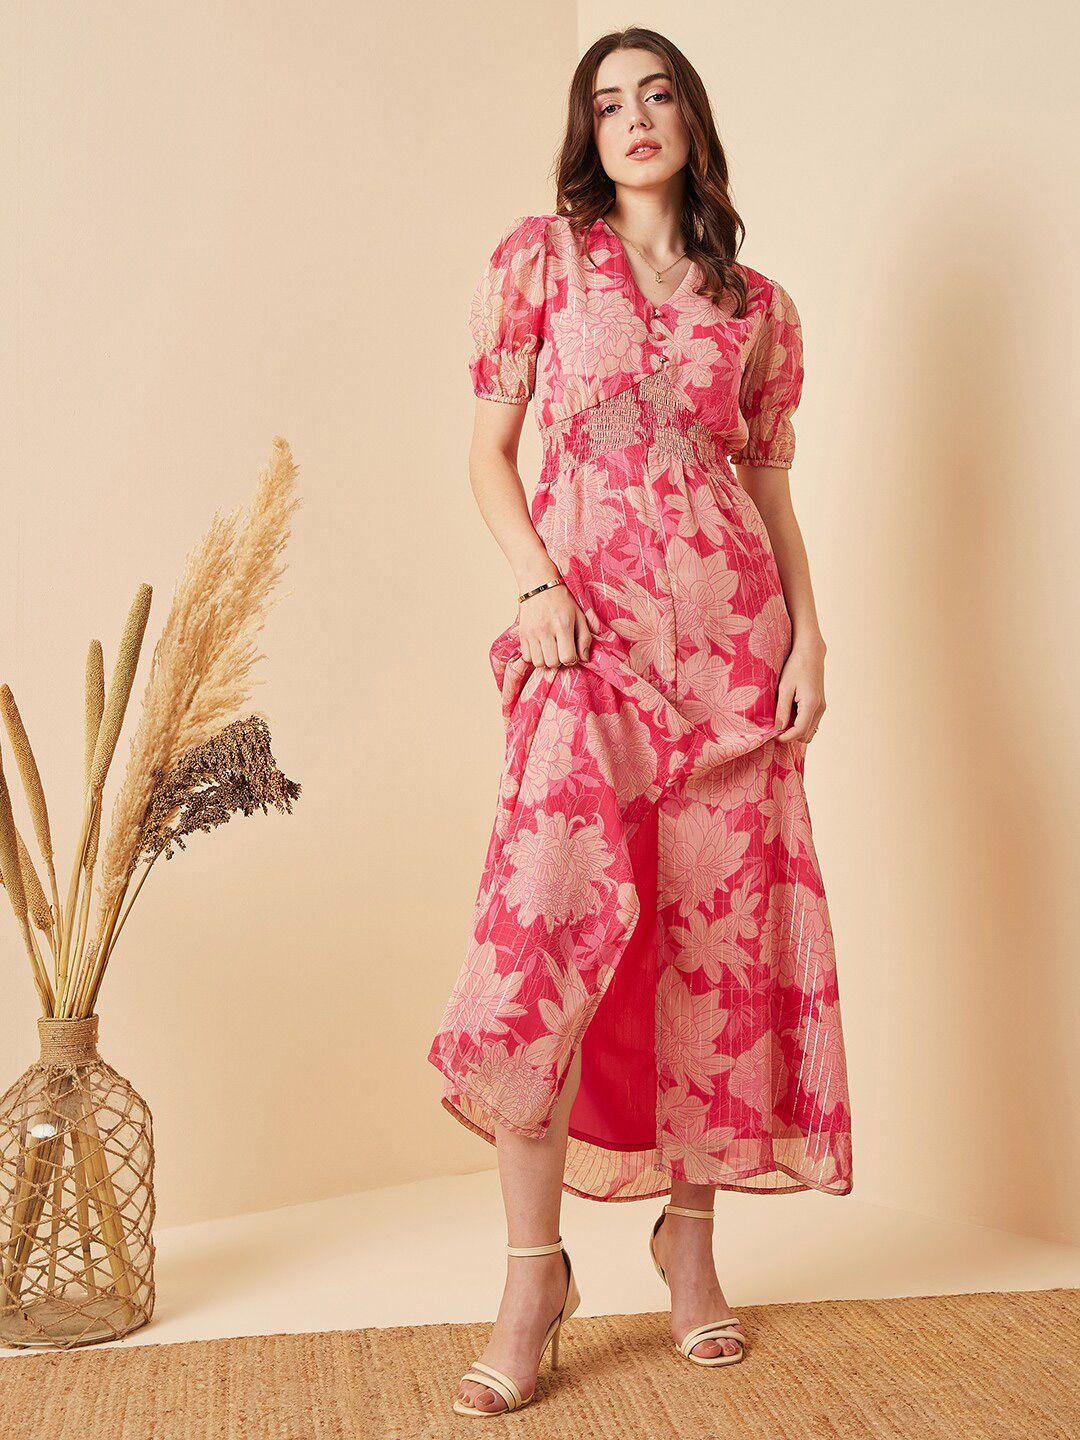 marie claire pink & peach-color floral printed smocked georgette a-line midi dress